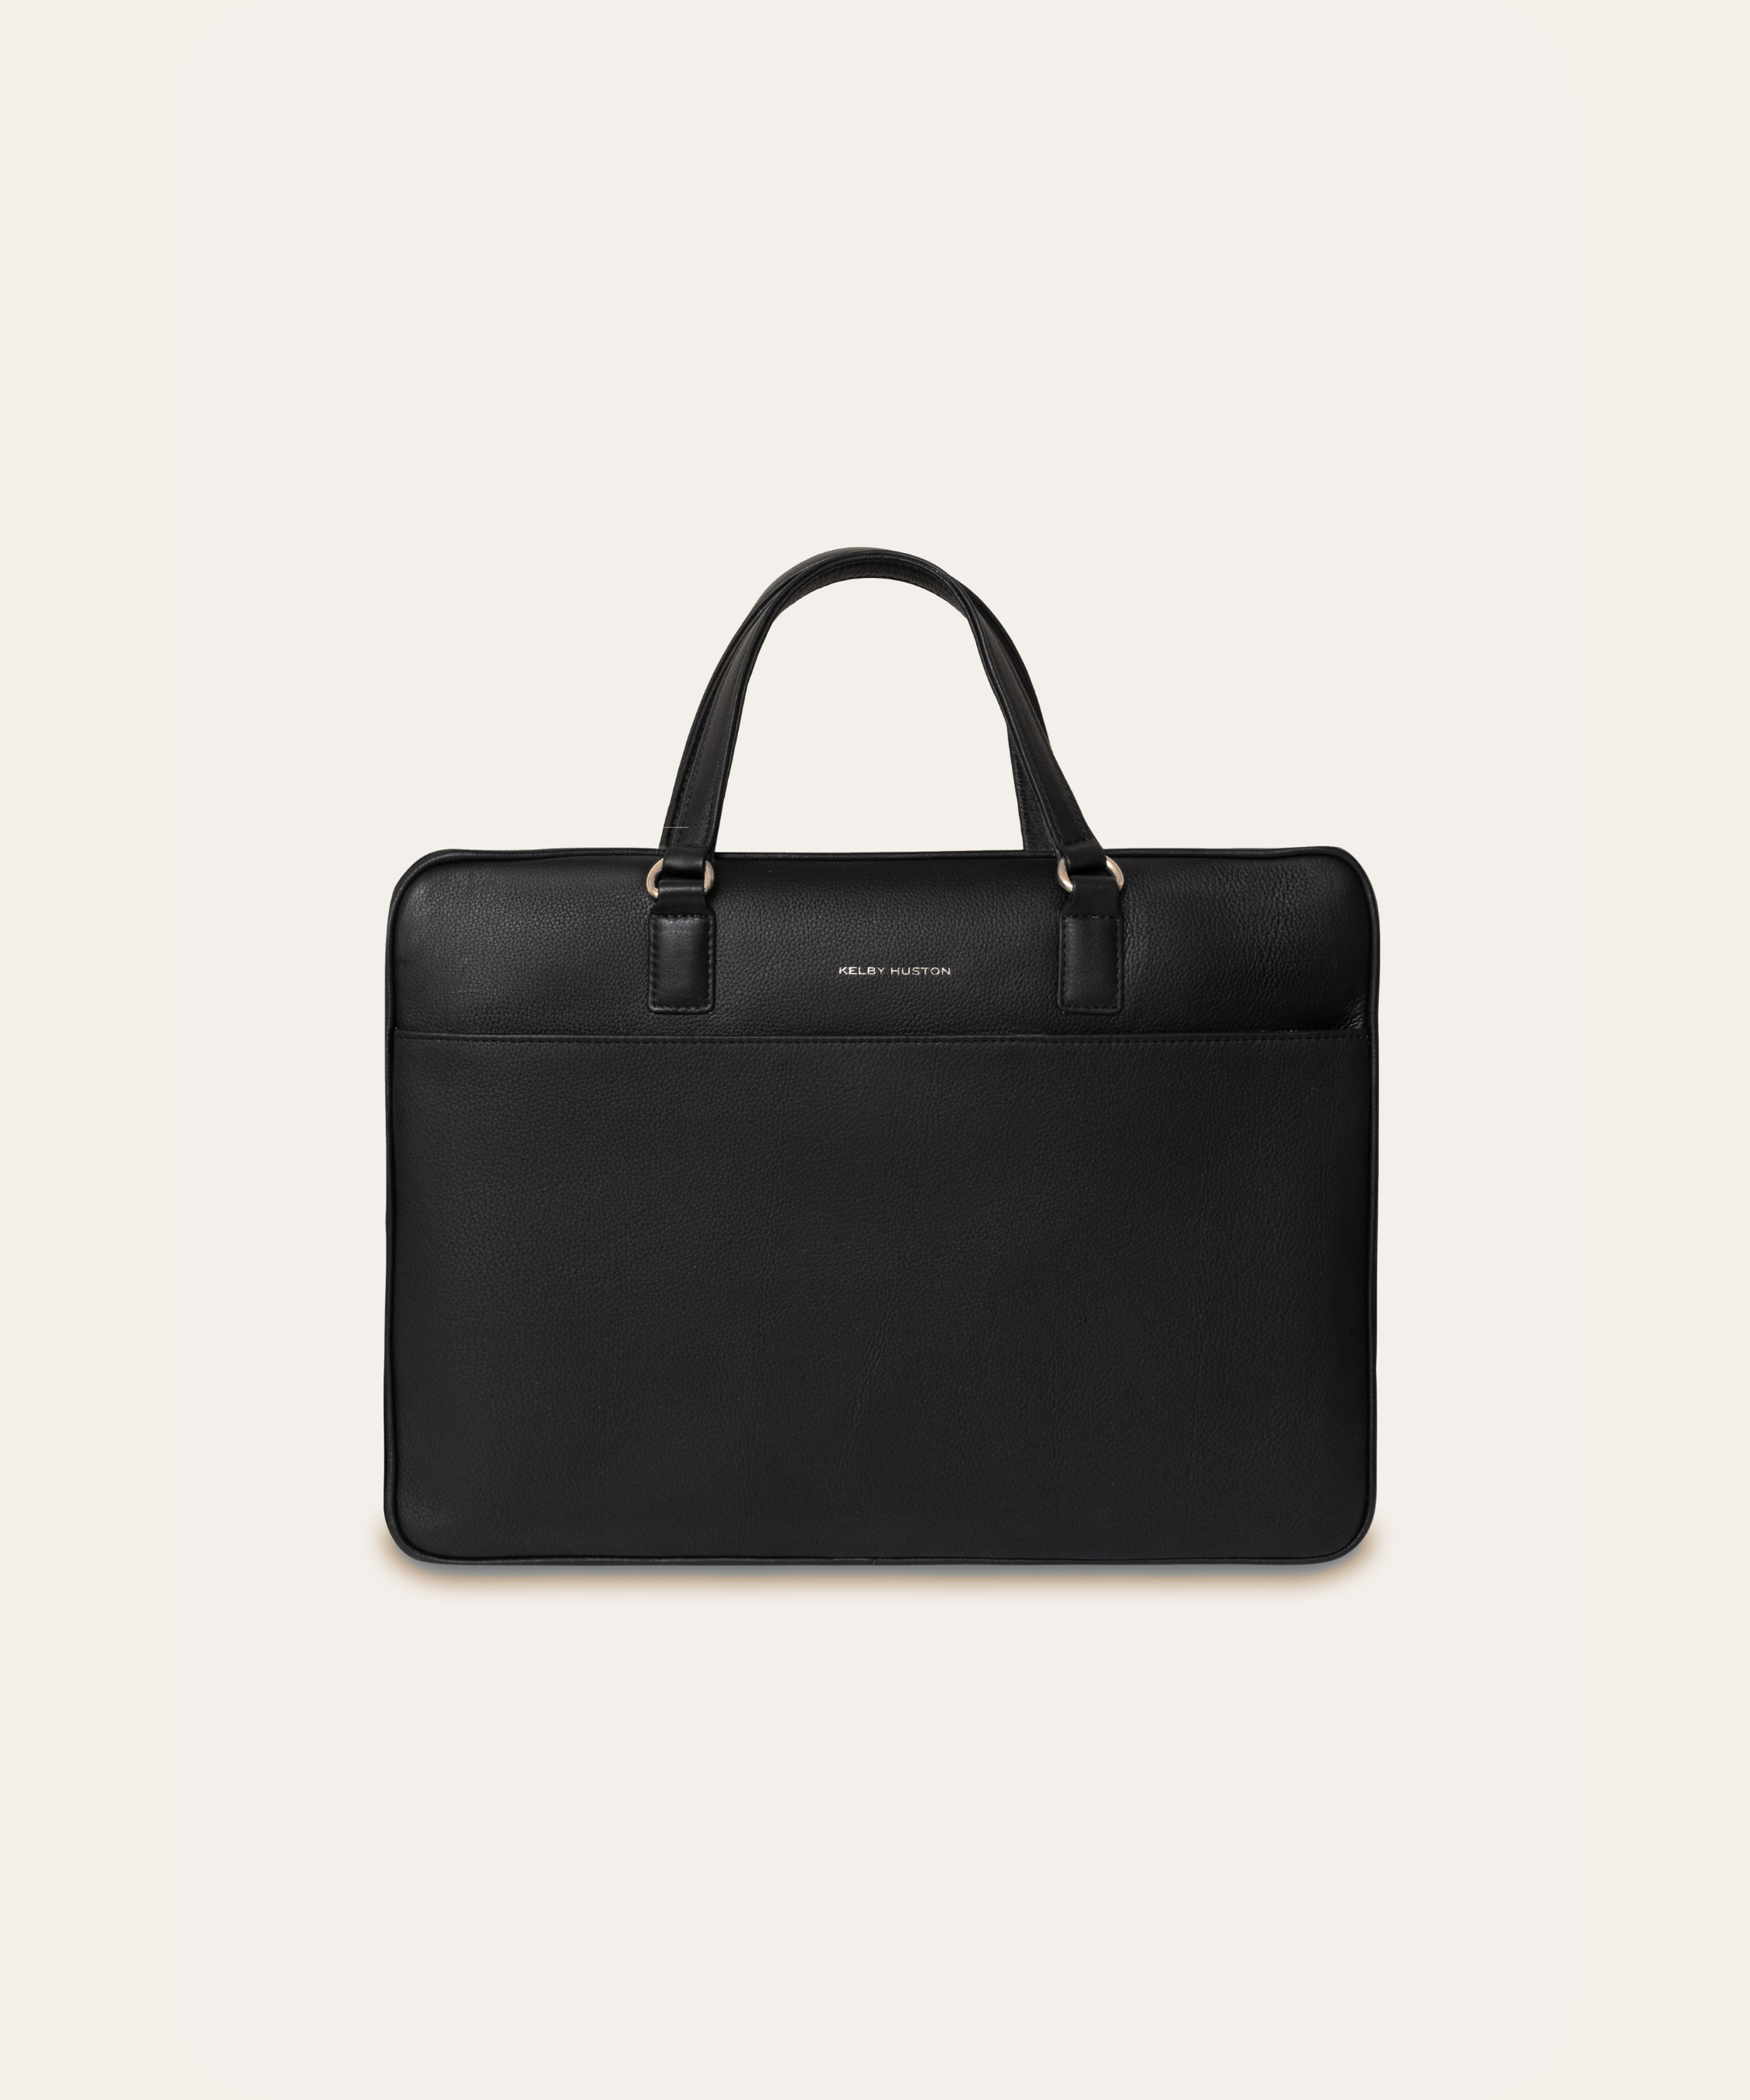 SADE LAPTOP BAG - BLACK, a product by Kelby Huston